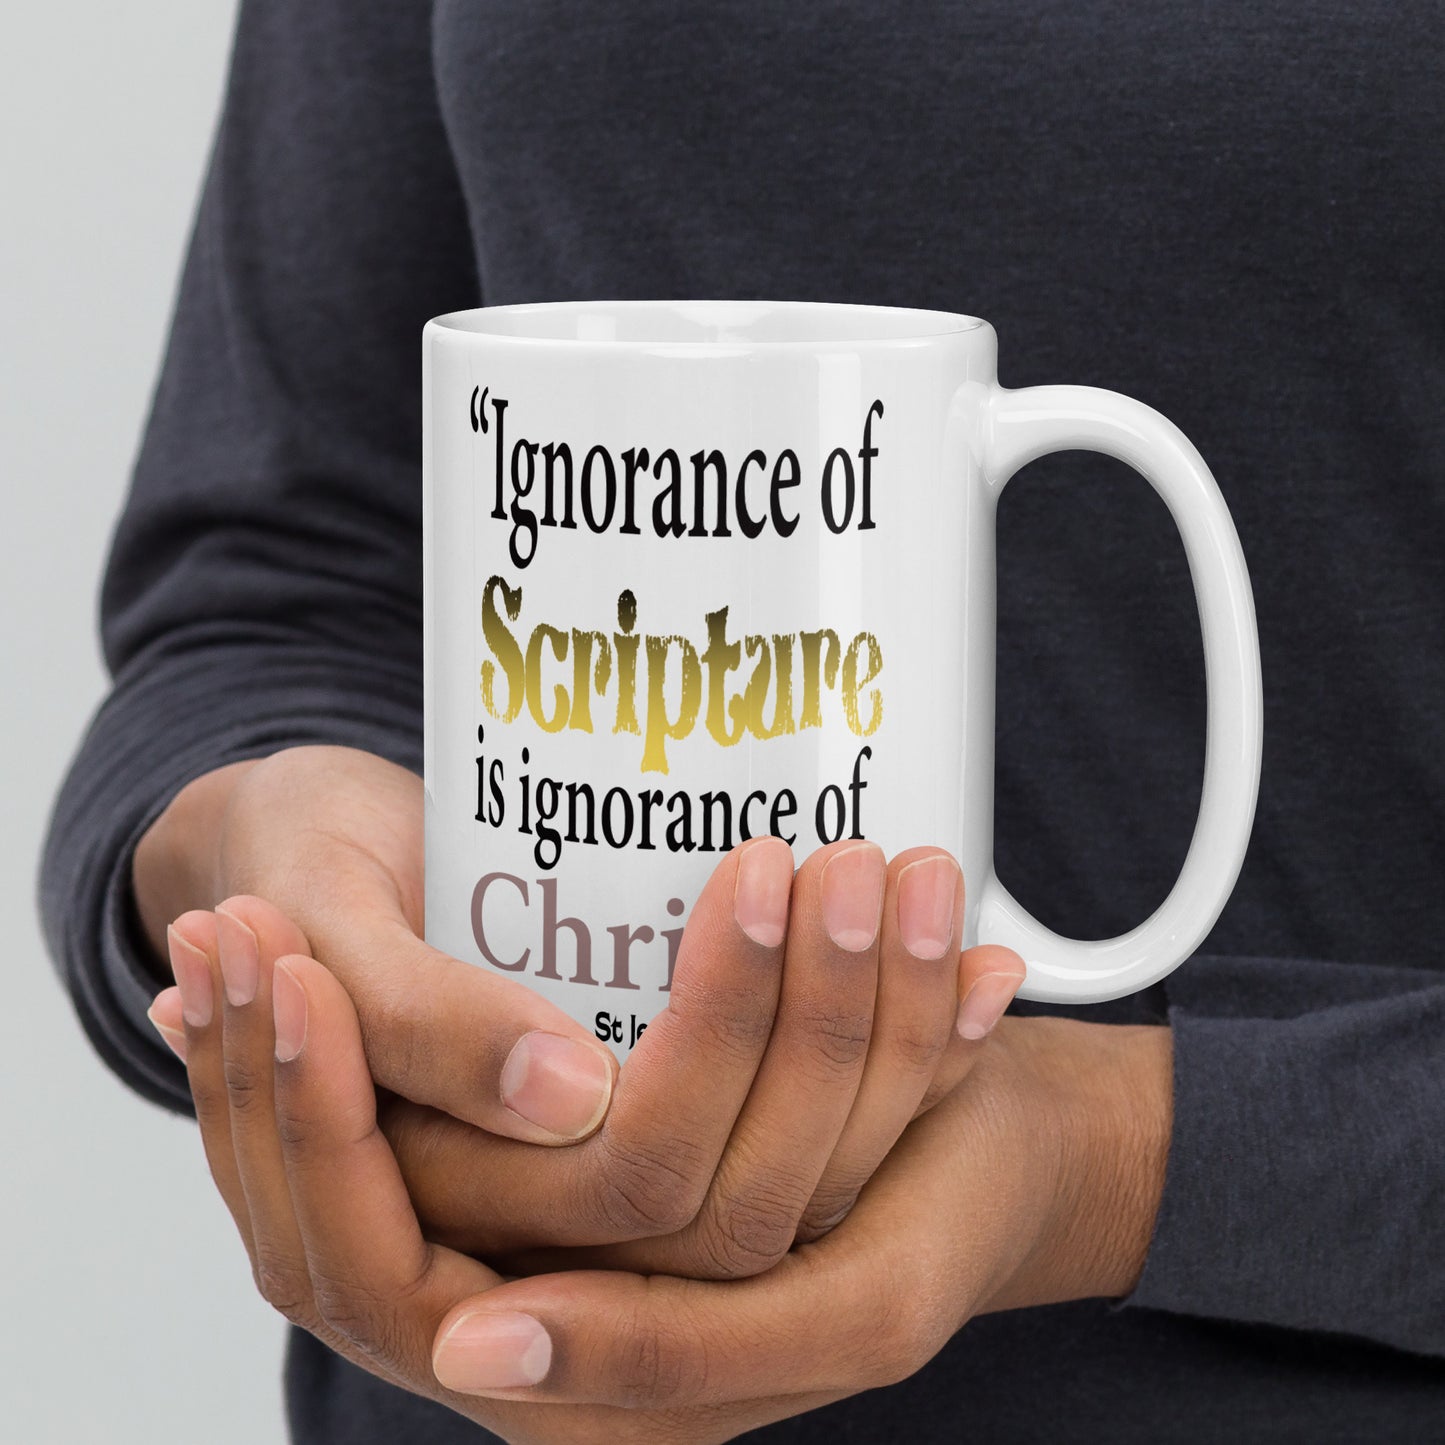 Ignorance of Scripture by St Jerome White glossy mug